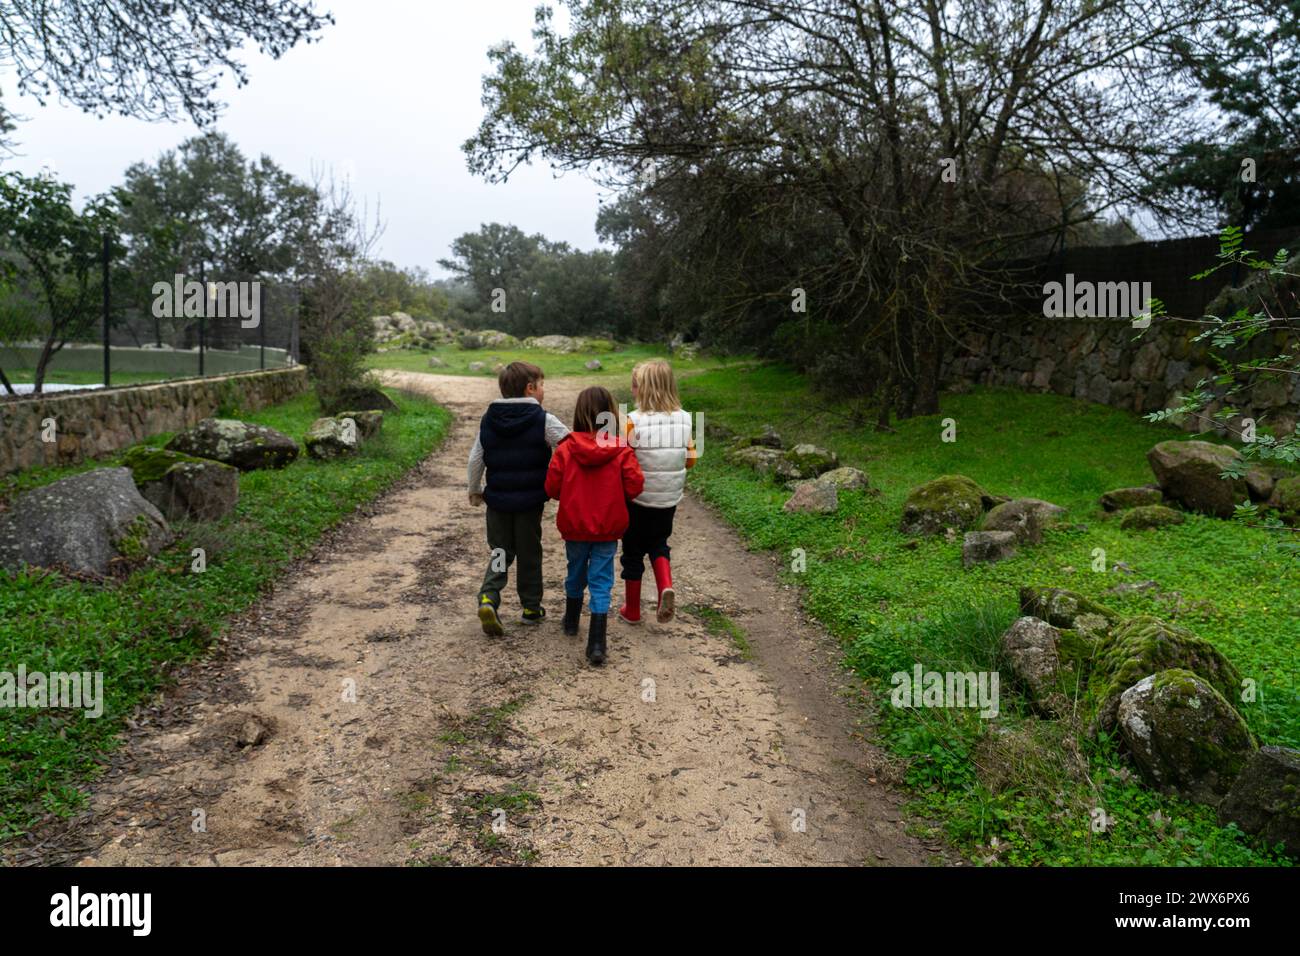 Three children walking through the field together seen from behind Stock Photo